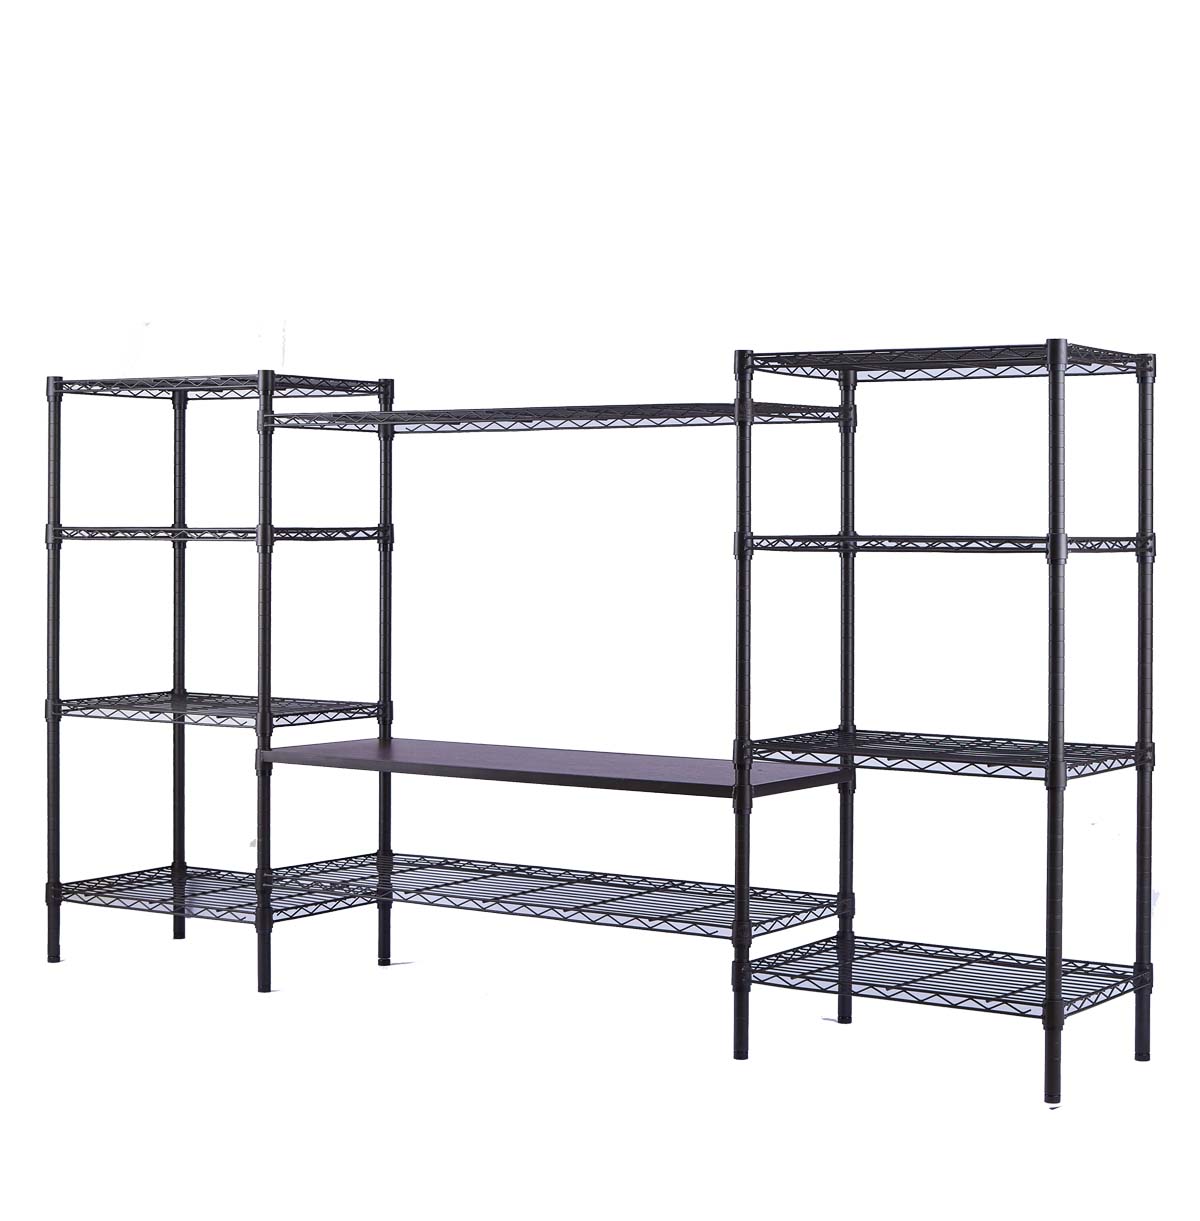 11-Tier Metal TV Stand for 42 inch TV / Entertainment Center / TV Console Table With Open Storage Shelves For Living Room / Bedroom